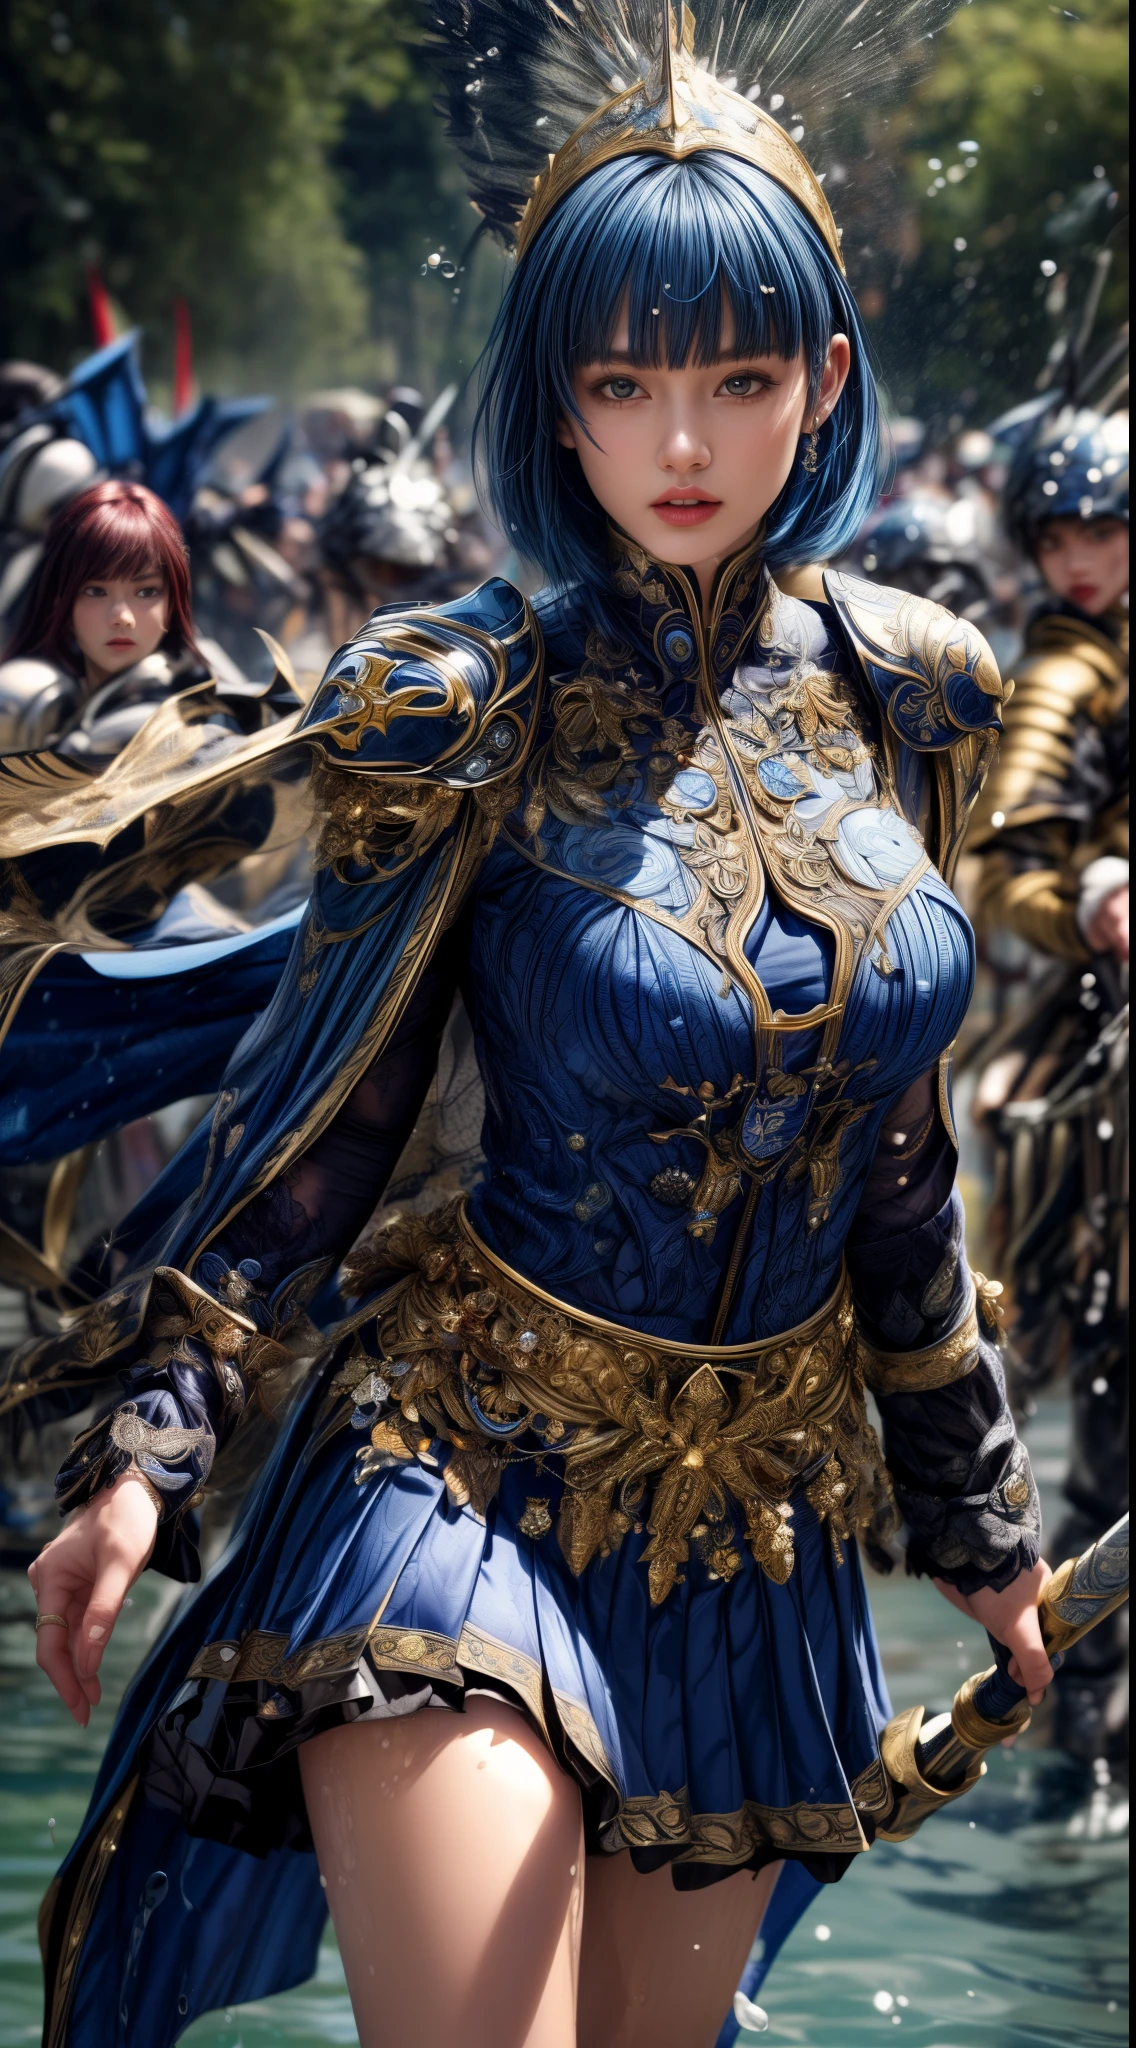 Very beautiful woman、Slender women、(Detailed face)、Realistic Skin、((holy knight)), ((Navy Blue Armor))、((((Black armor with very fine and intricate decoration:1.1))))、((Delicate photo))，(Girl Astepeace RAW Photo Details:1.25), (highest quality:1.6), (超A high resolution:1.5), (Realistic:1.75), 8K resolution, Canon EOS R5, 50mm, Absurd, Ultra-detailed,Cinema Lighting,((battlefield))、((battle))、(((Navy Skirt with Embellishments)))、Thigh-high socks、Shin Guards、((Dark blue hair))、((Bowl cut hairstyle with bangs,))、Get six-pack、Cape、Beautiful Armor、(((Has a huge weapon)))、(In combat)、The wind is blowing、((Symmetrical Armor))、((((Splash))))、(((Leading a large group of blue knights:1.2)))、Banner、Armor with a dragon motif、(((Battle Scene)))